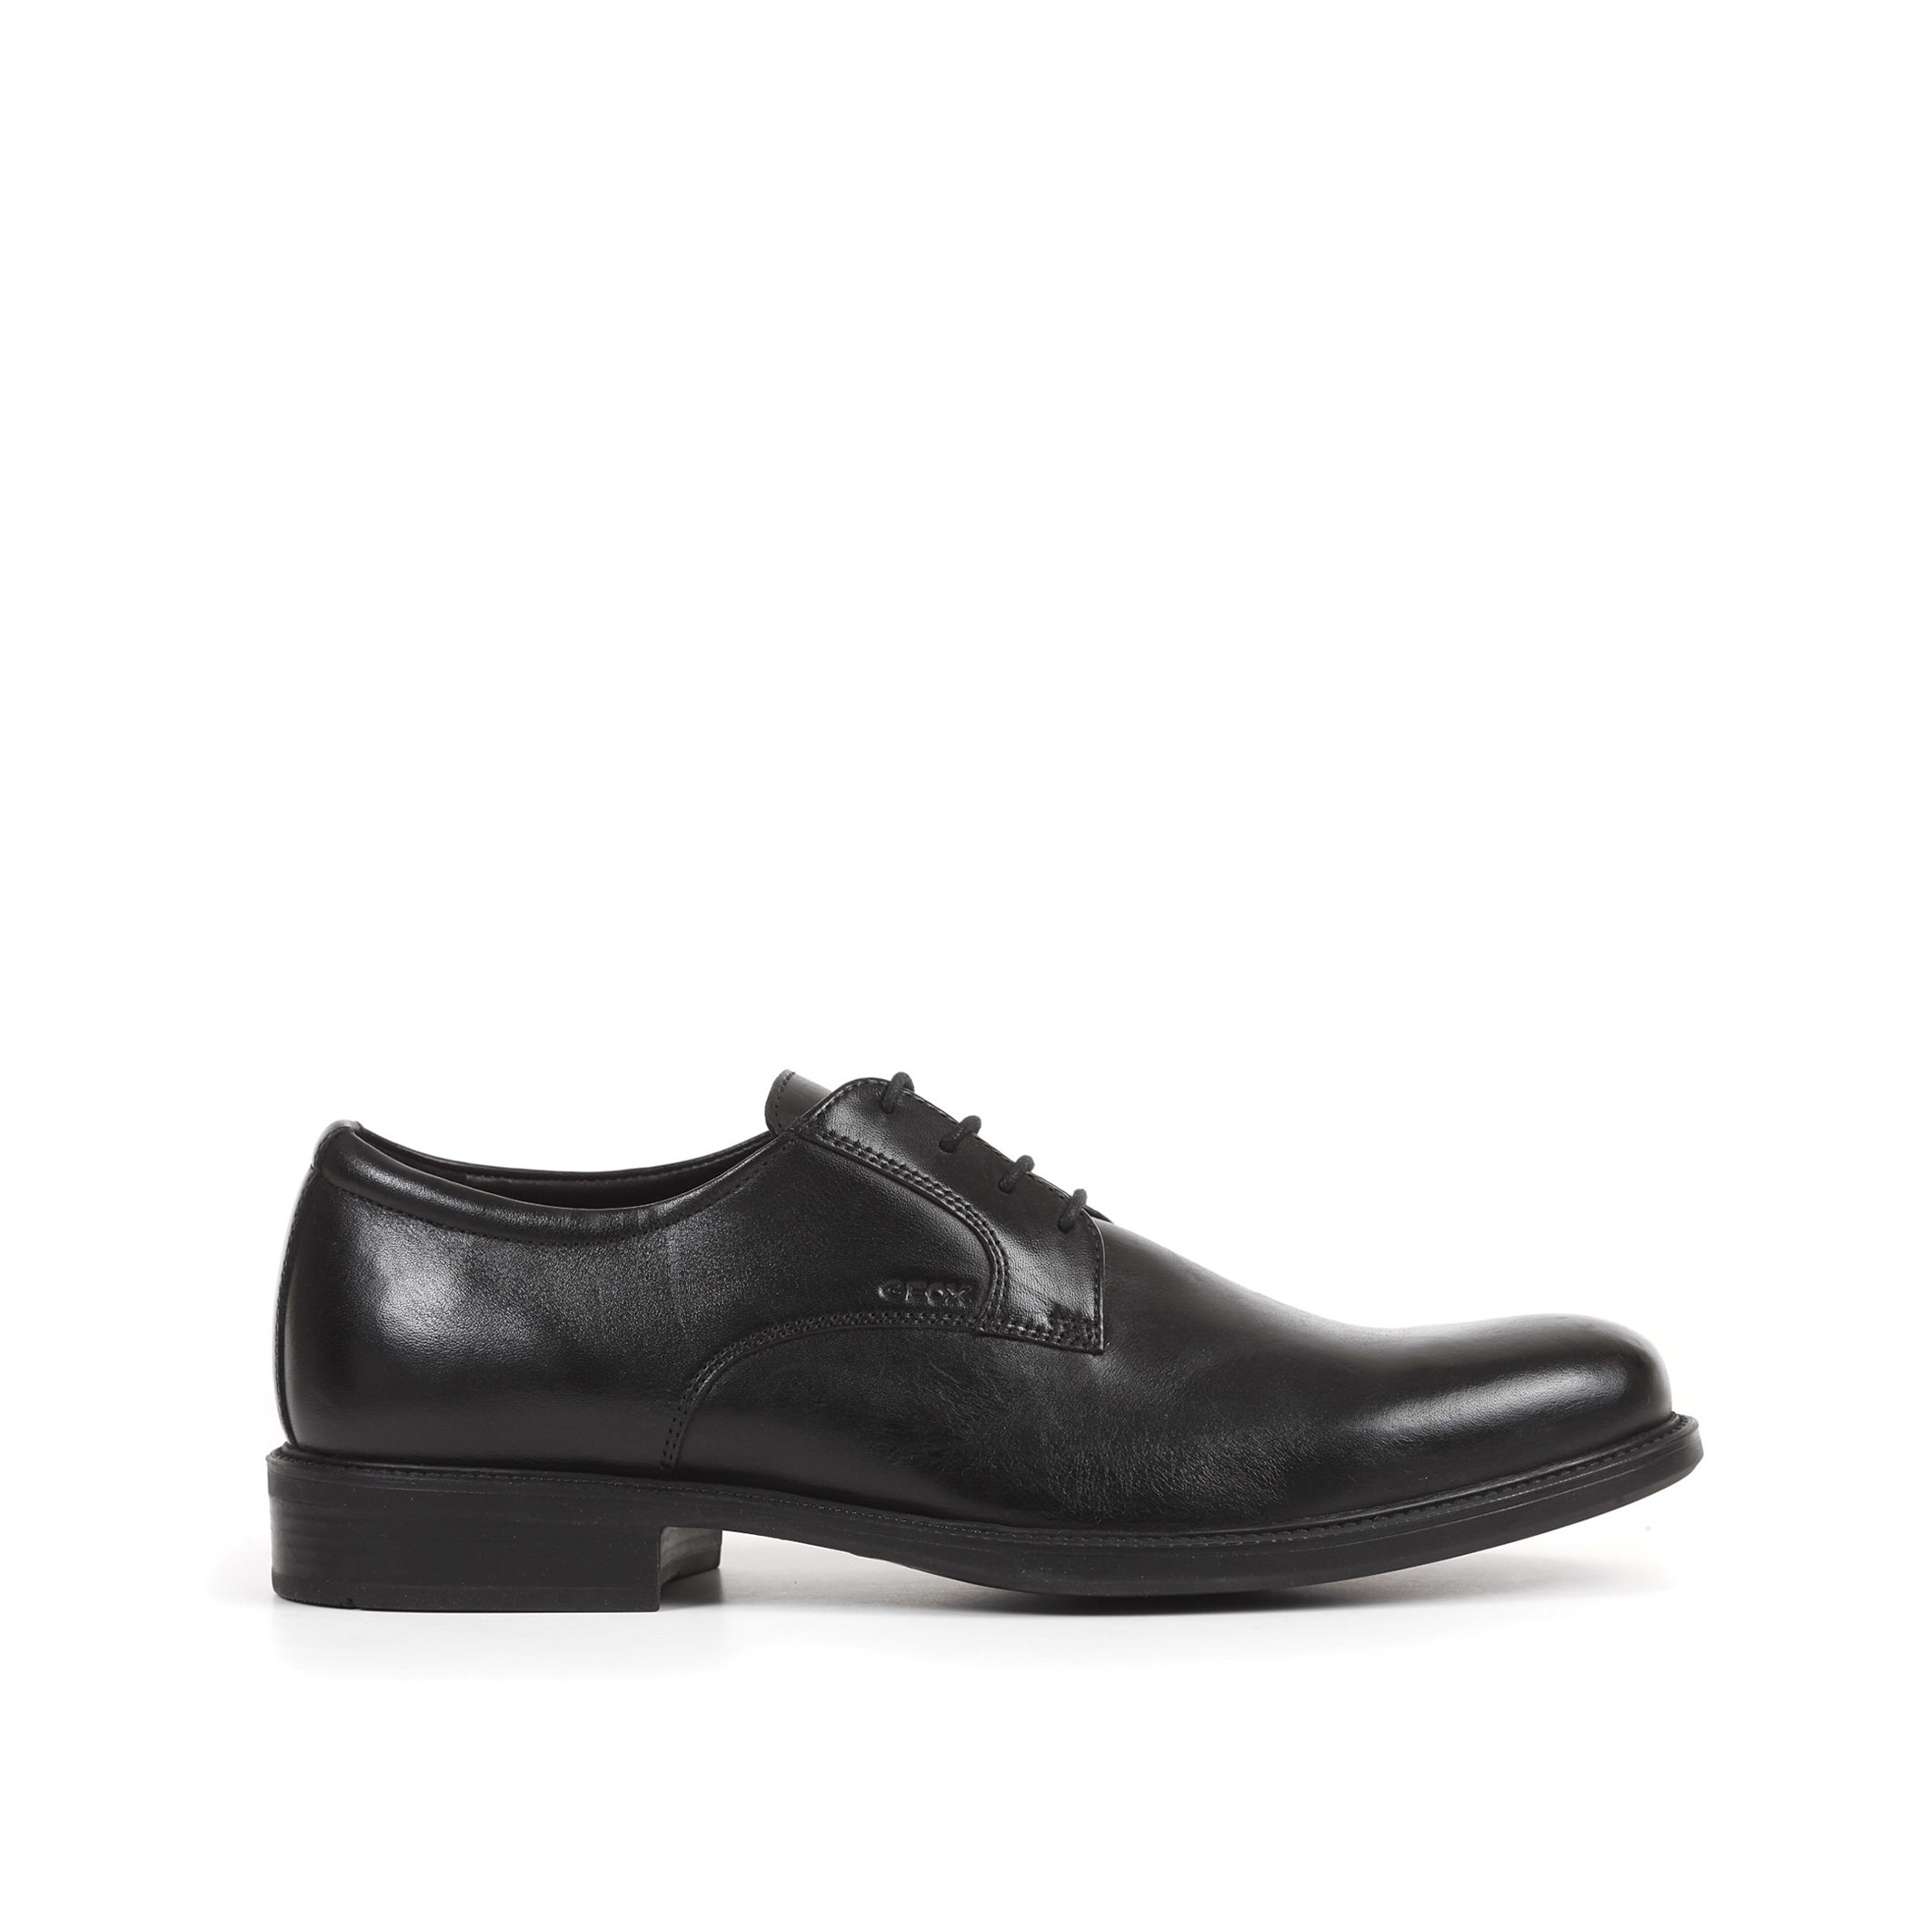 Carnaby breathable leather brogues, black, Geox | La Redoute